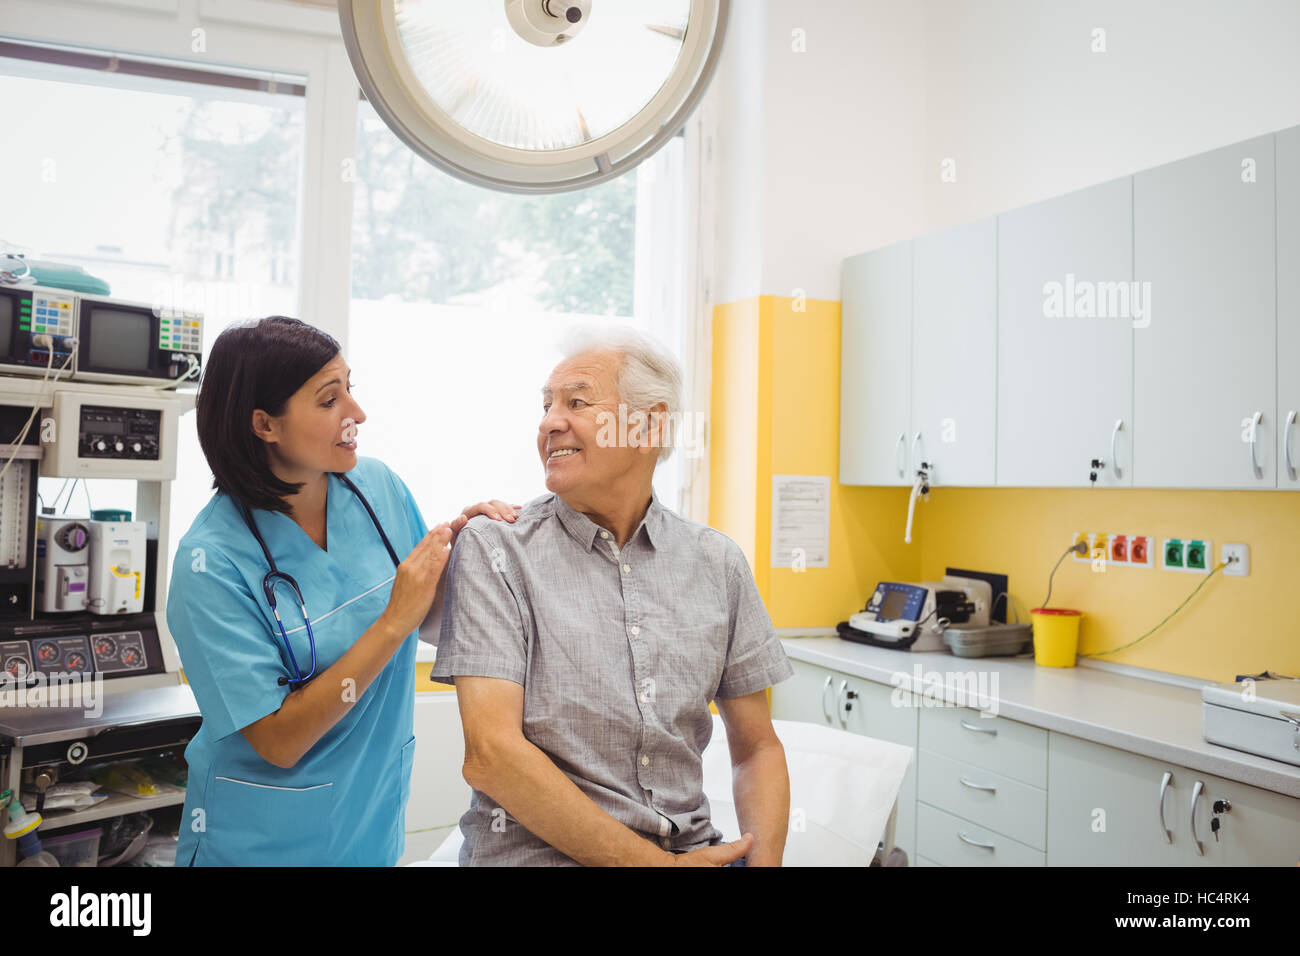 Female doctor and patient interacting with each other Stock Photo